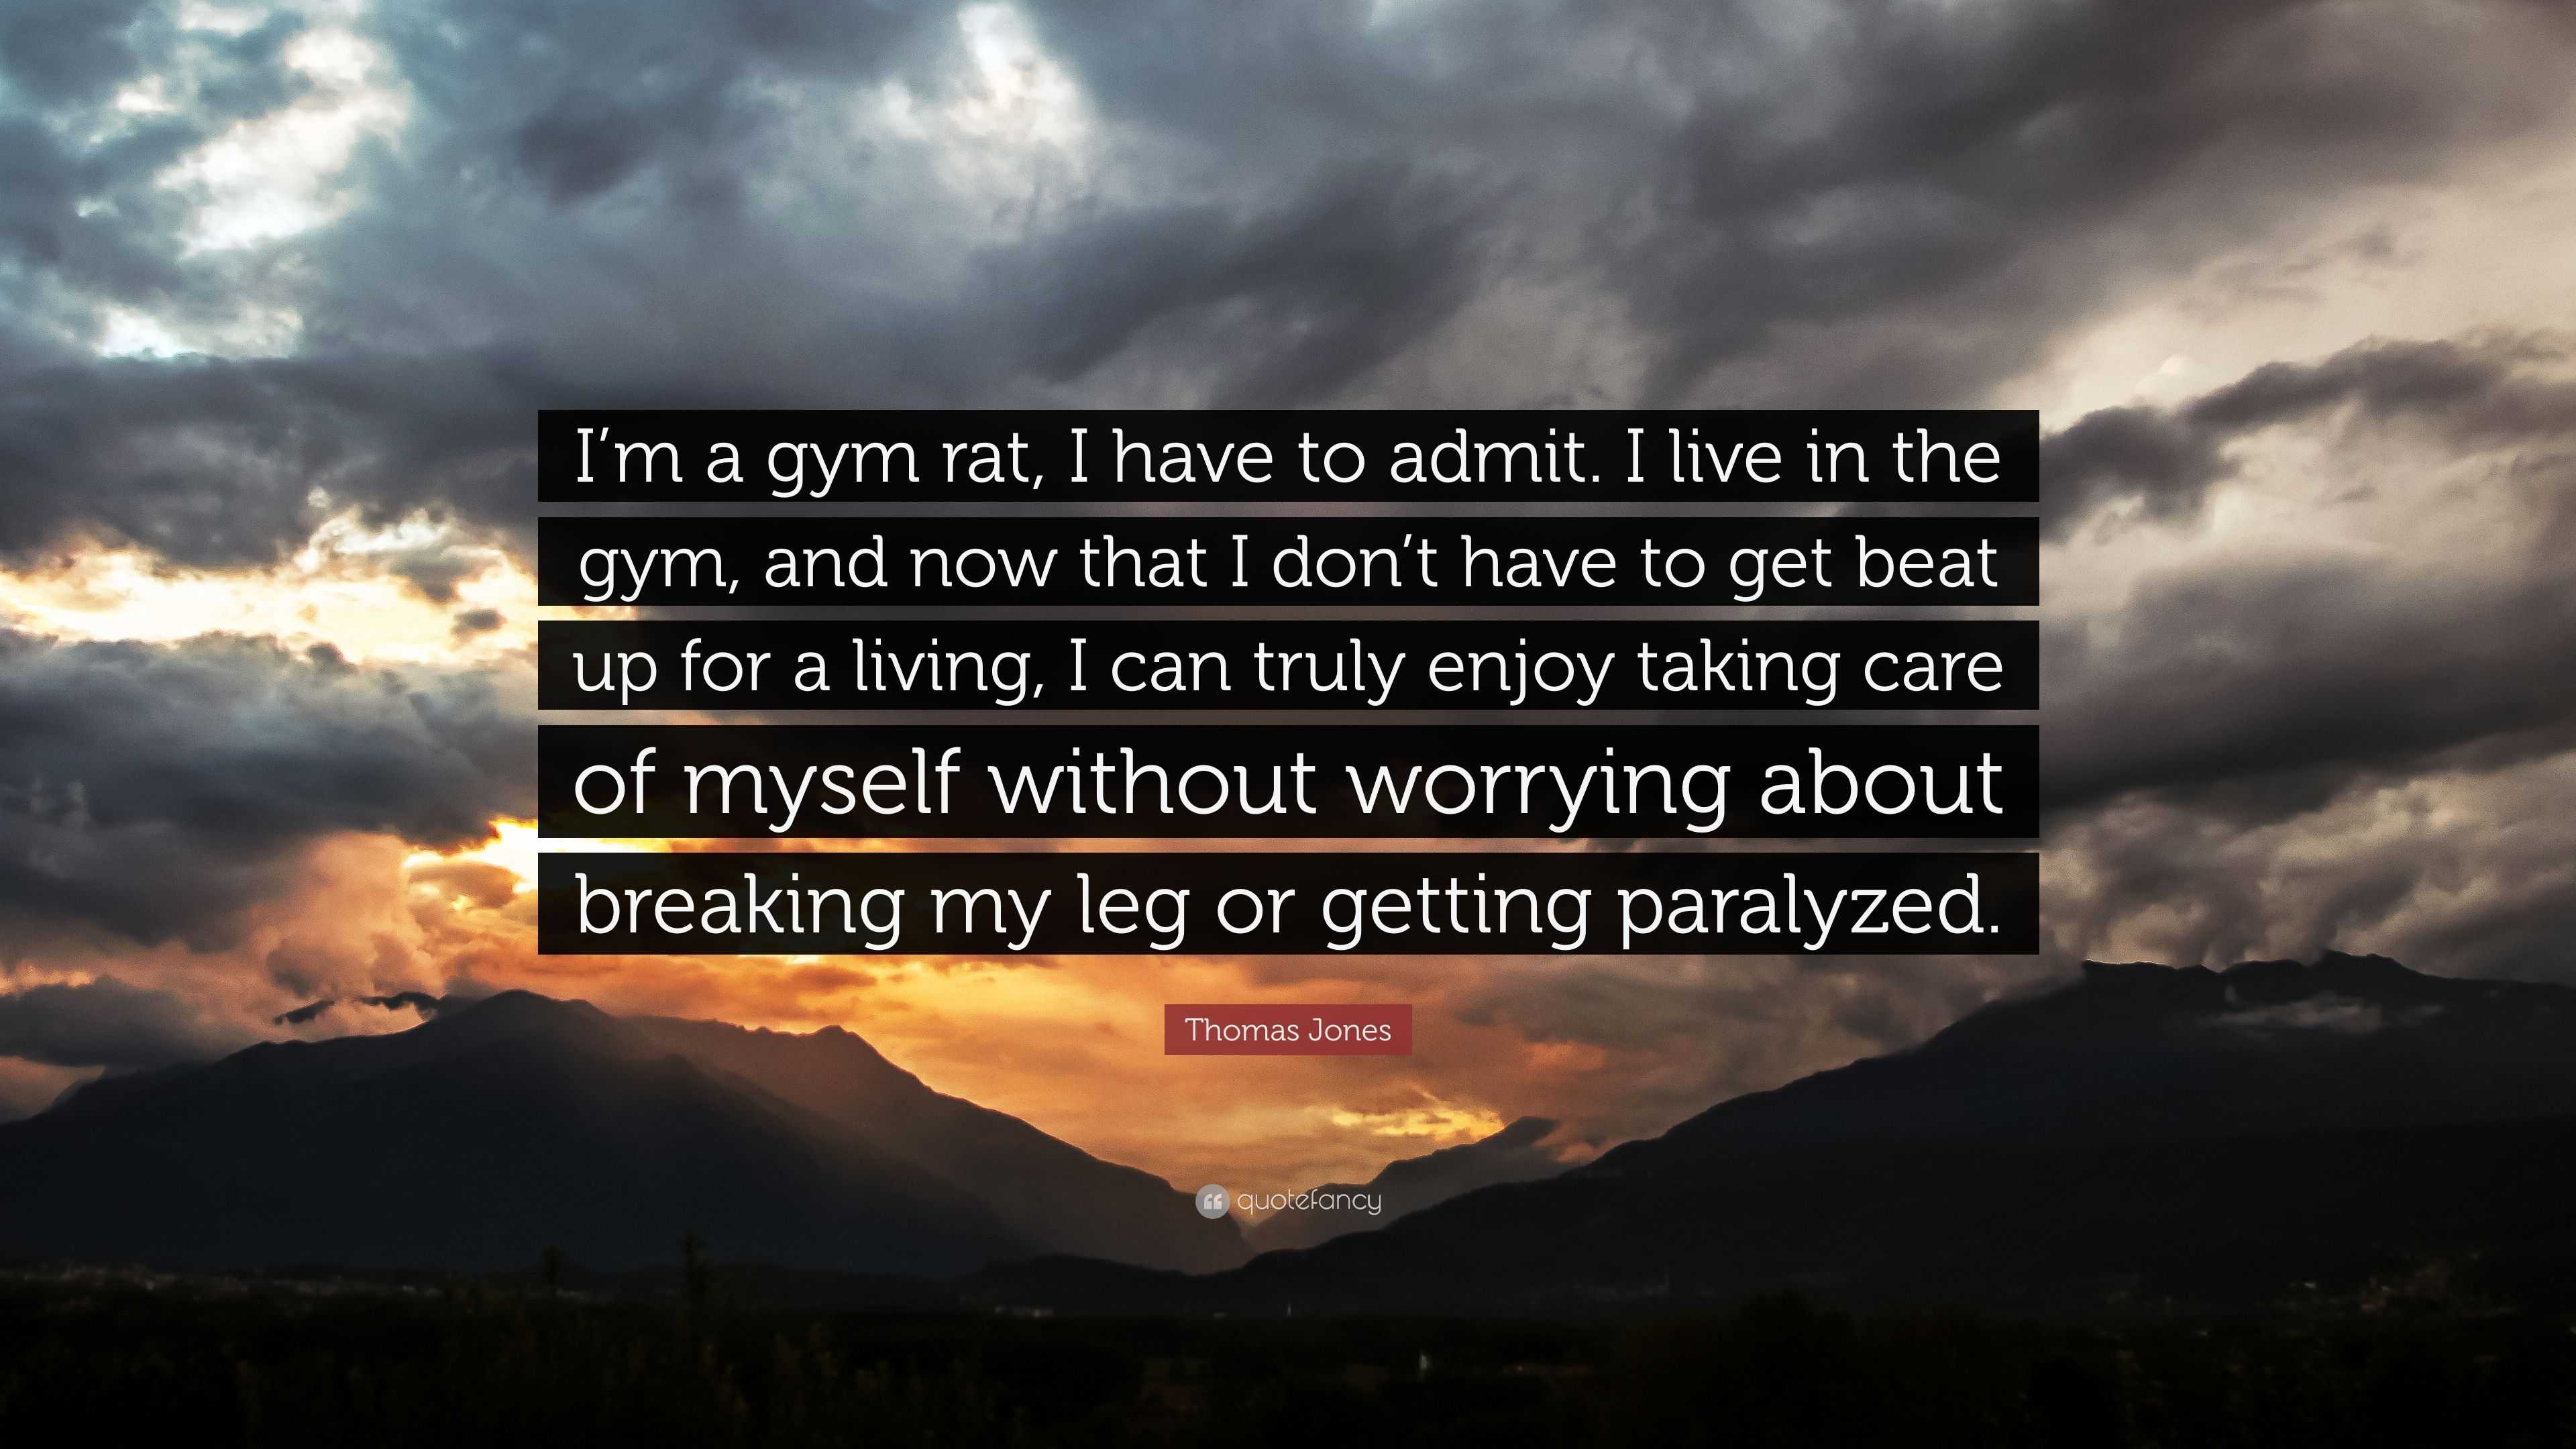 https://quotefancy.com/media/wallpaper/3840x2160/3972091-Thomas-Jones-Quote-I-m-a-gym-rat-I-have-to-admit-I-live-in-the-gym.jpg